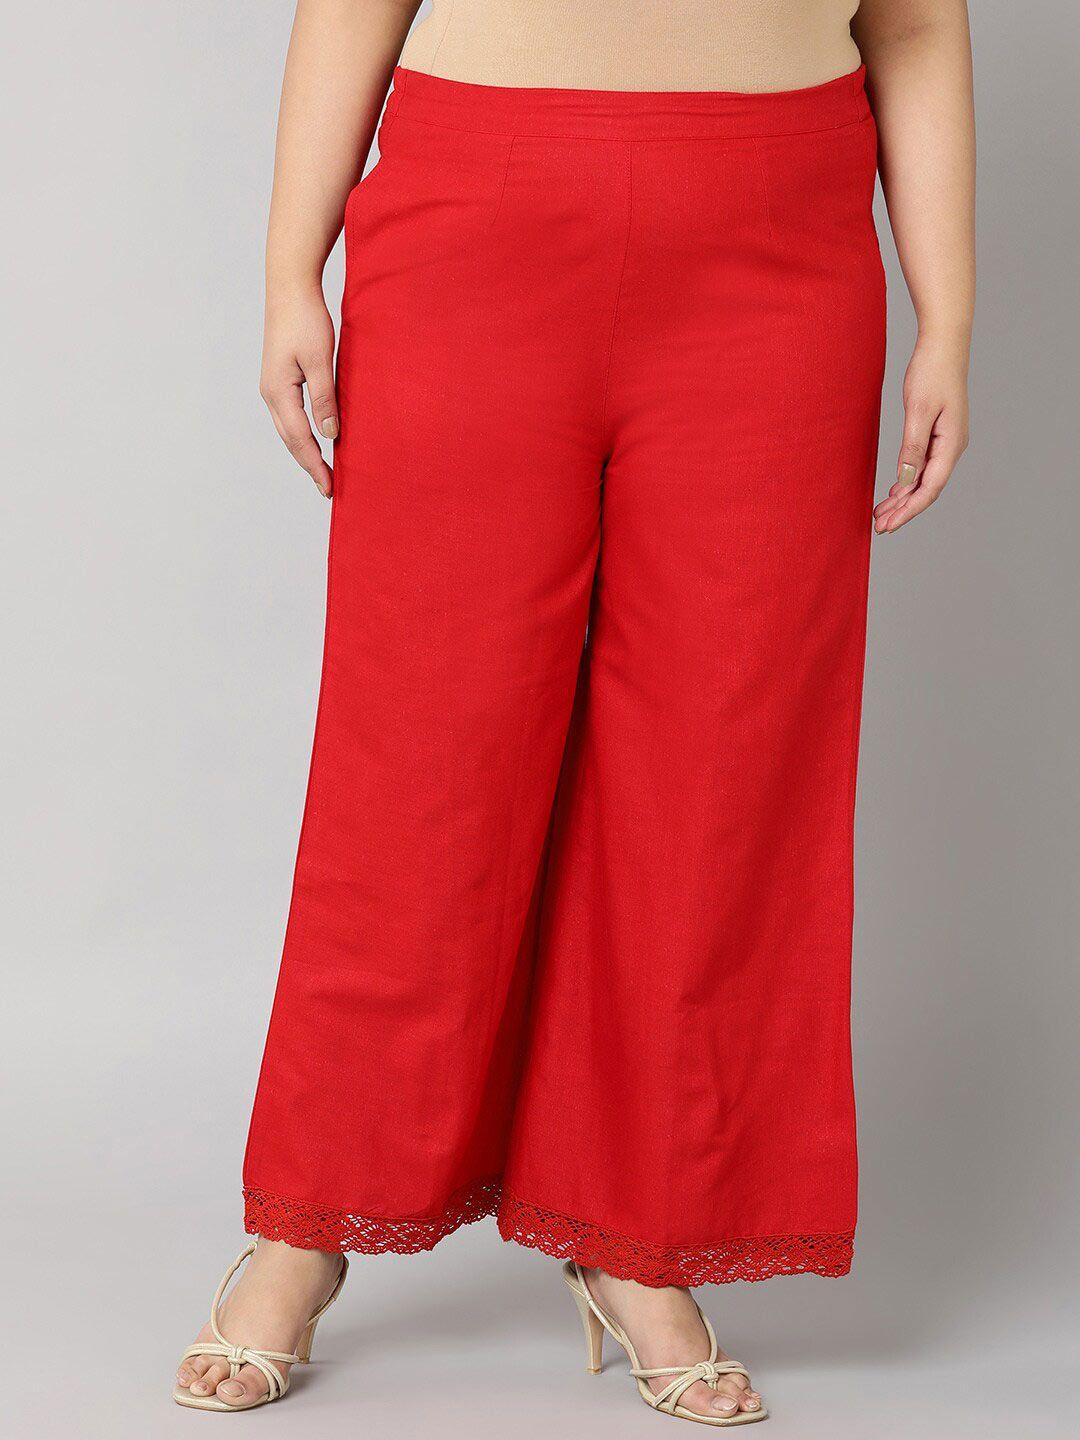 bani plus size women red flared knitted palazzos